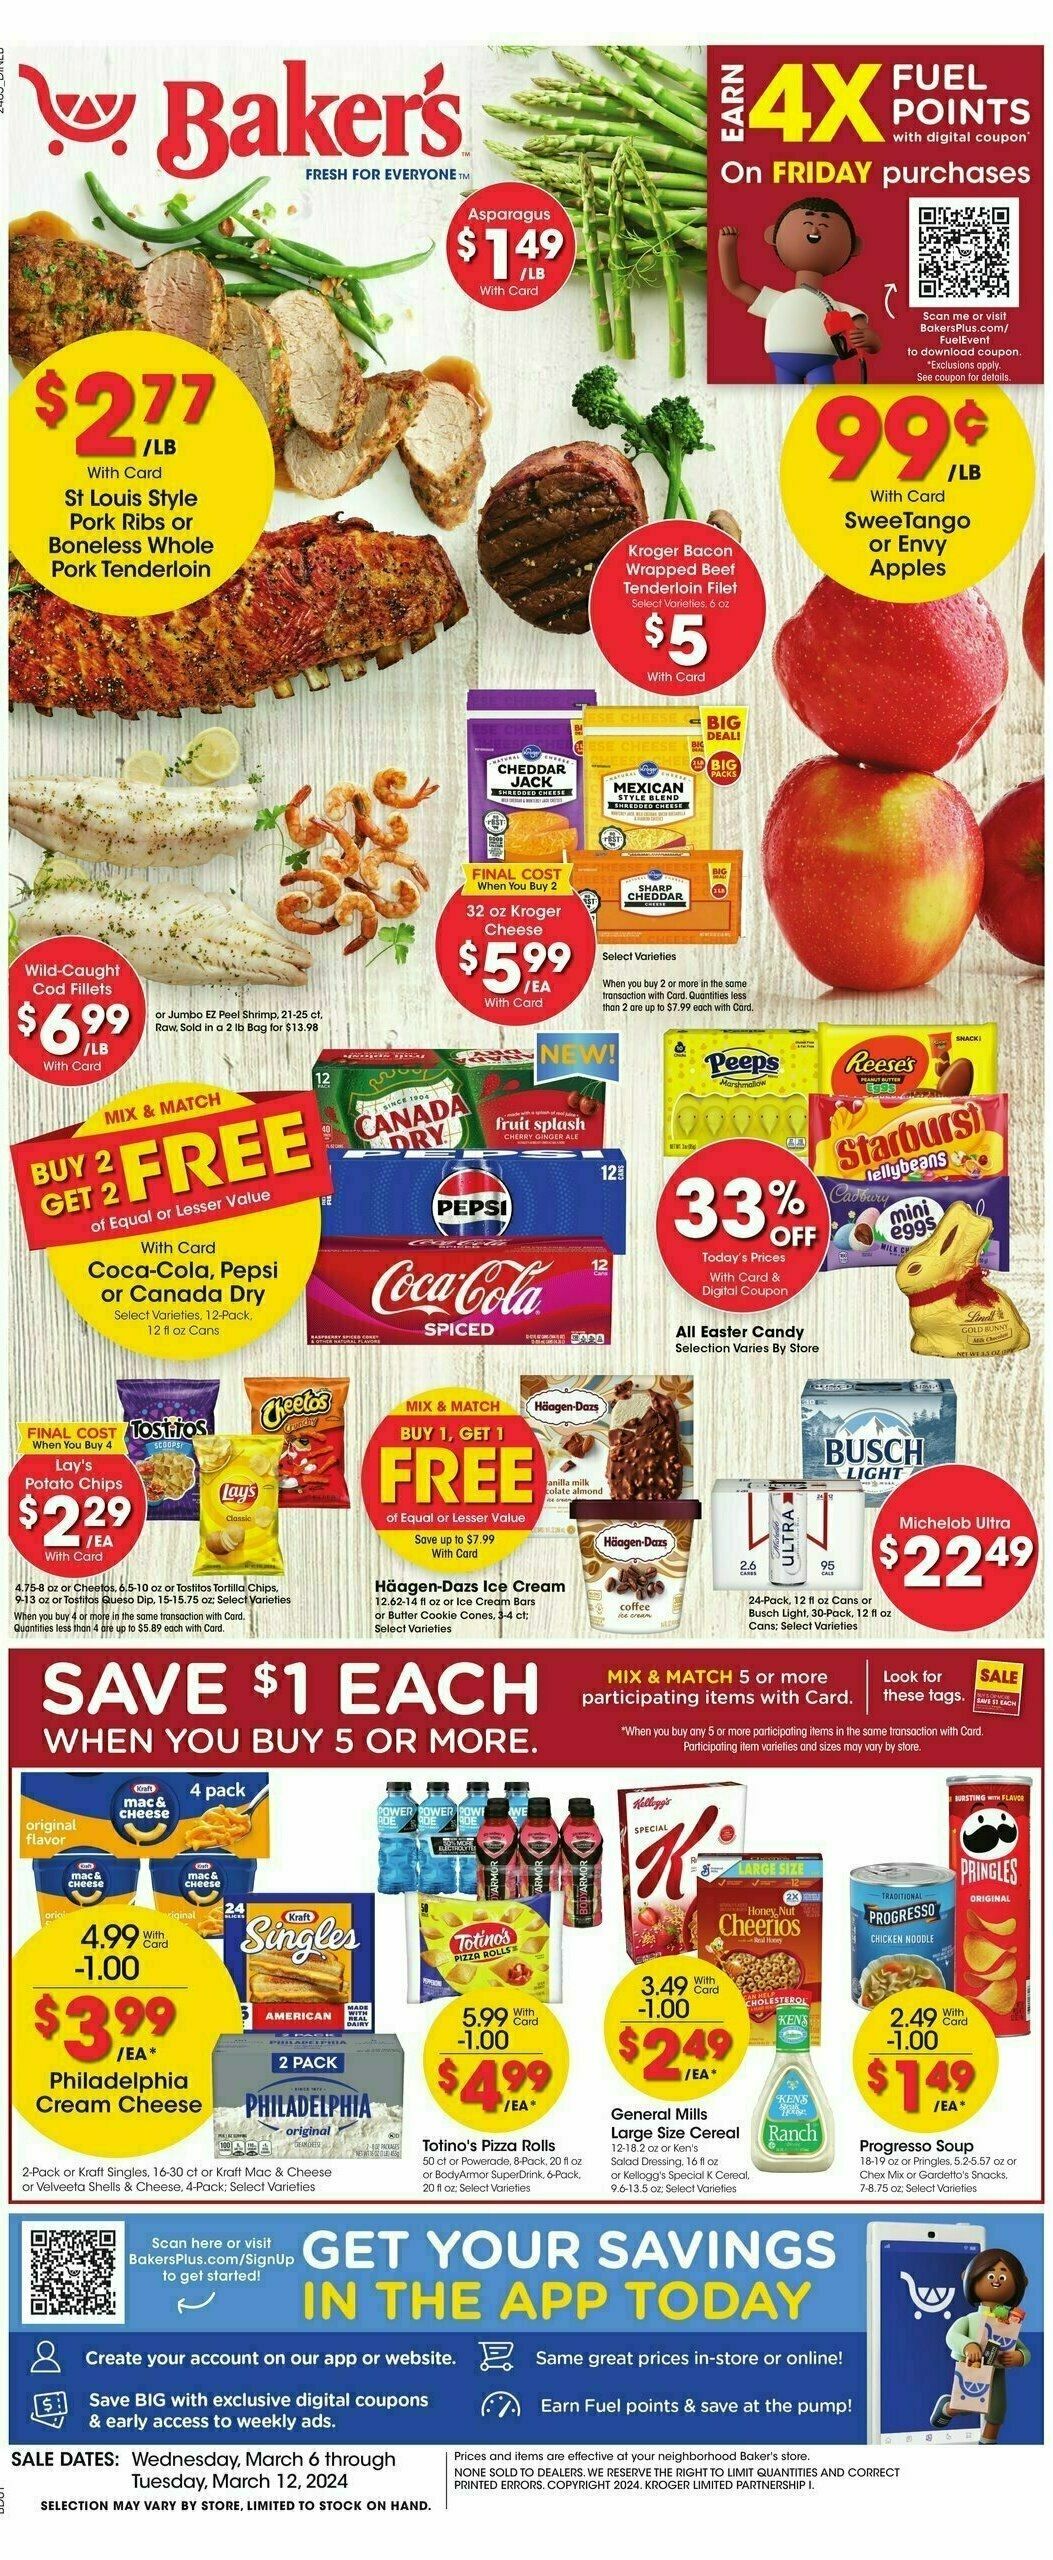 Baker's Weekly Ad from March 6